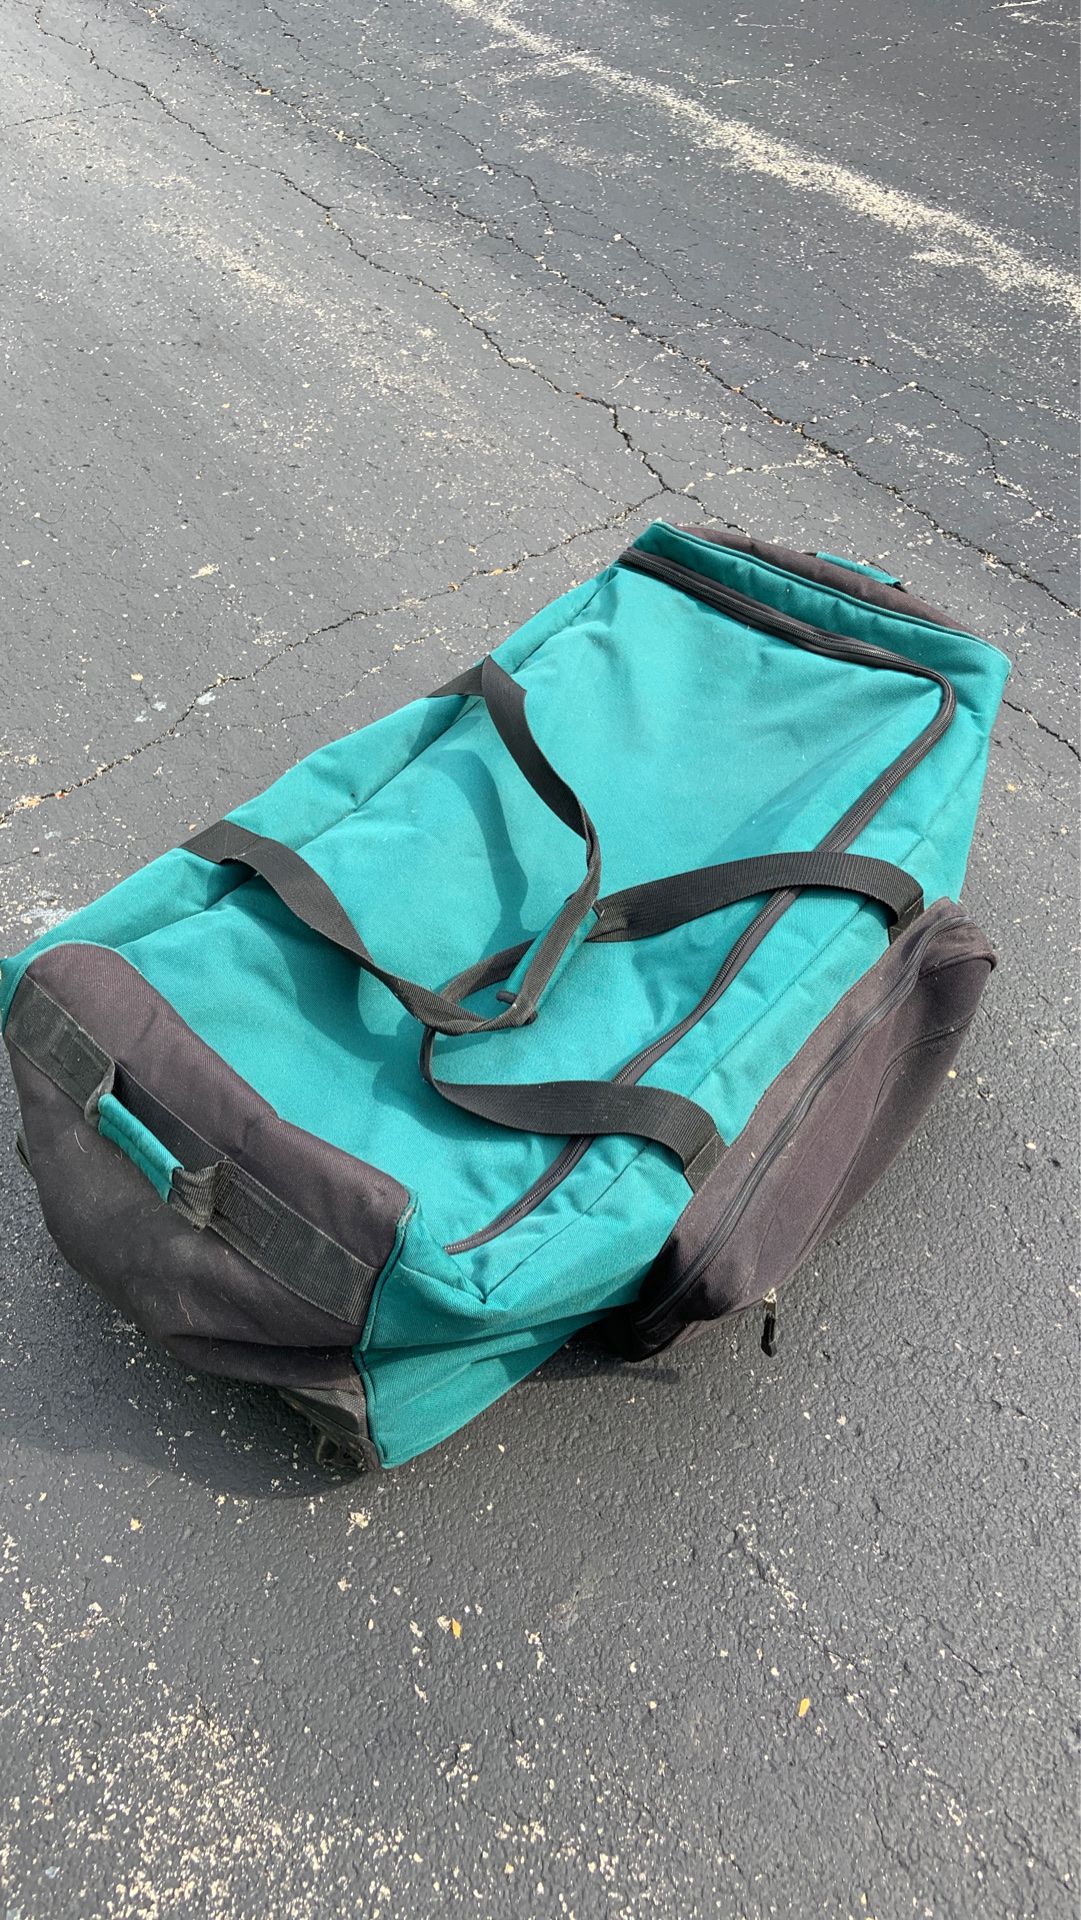 Large Duffle Bag with wheels